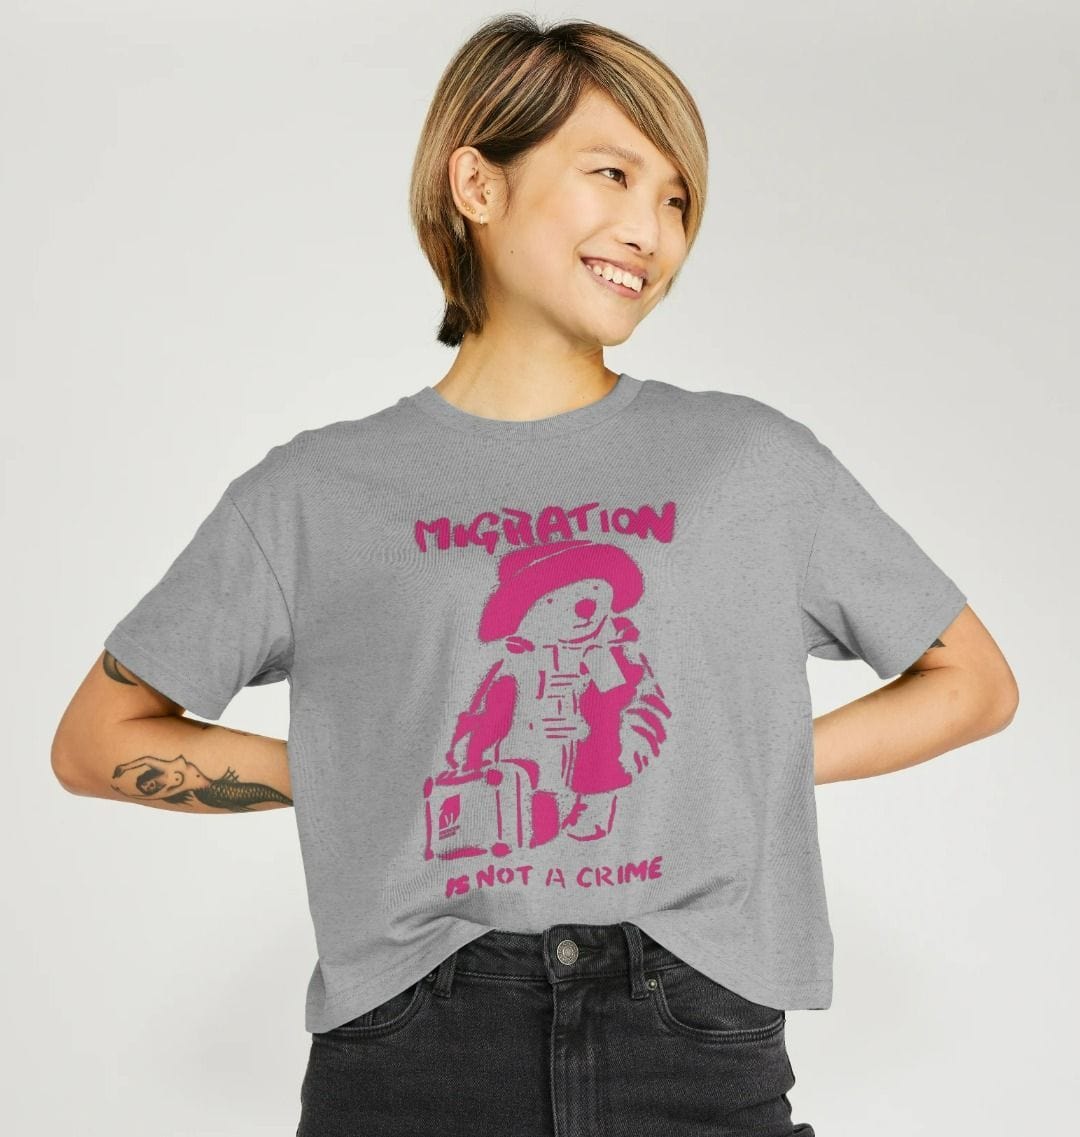 Migration Is Not a Crime - Organic Cotton Women's Boxy Tee